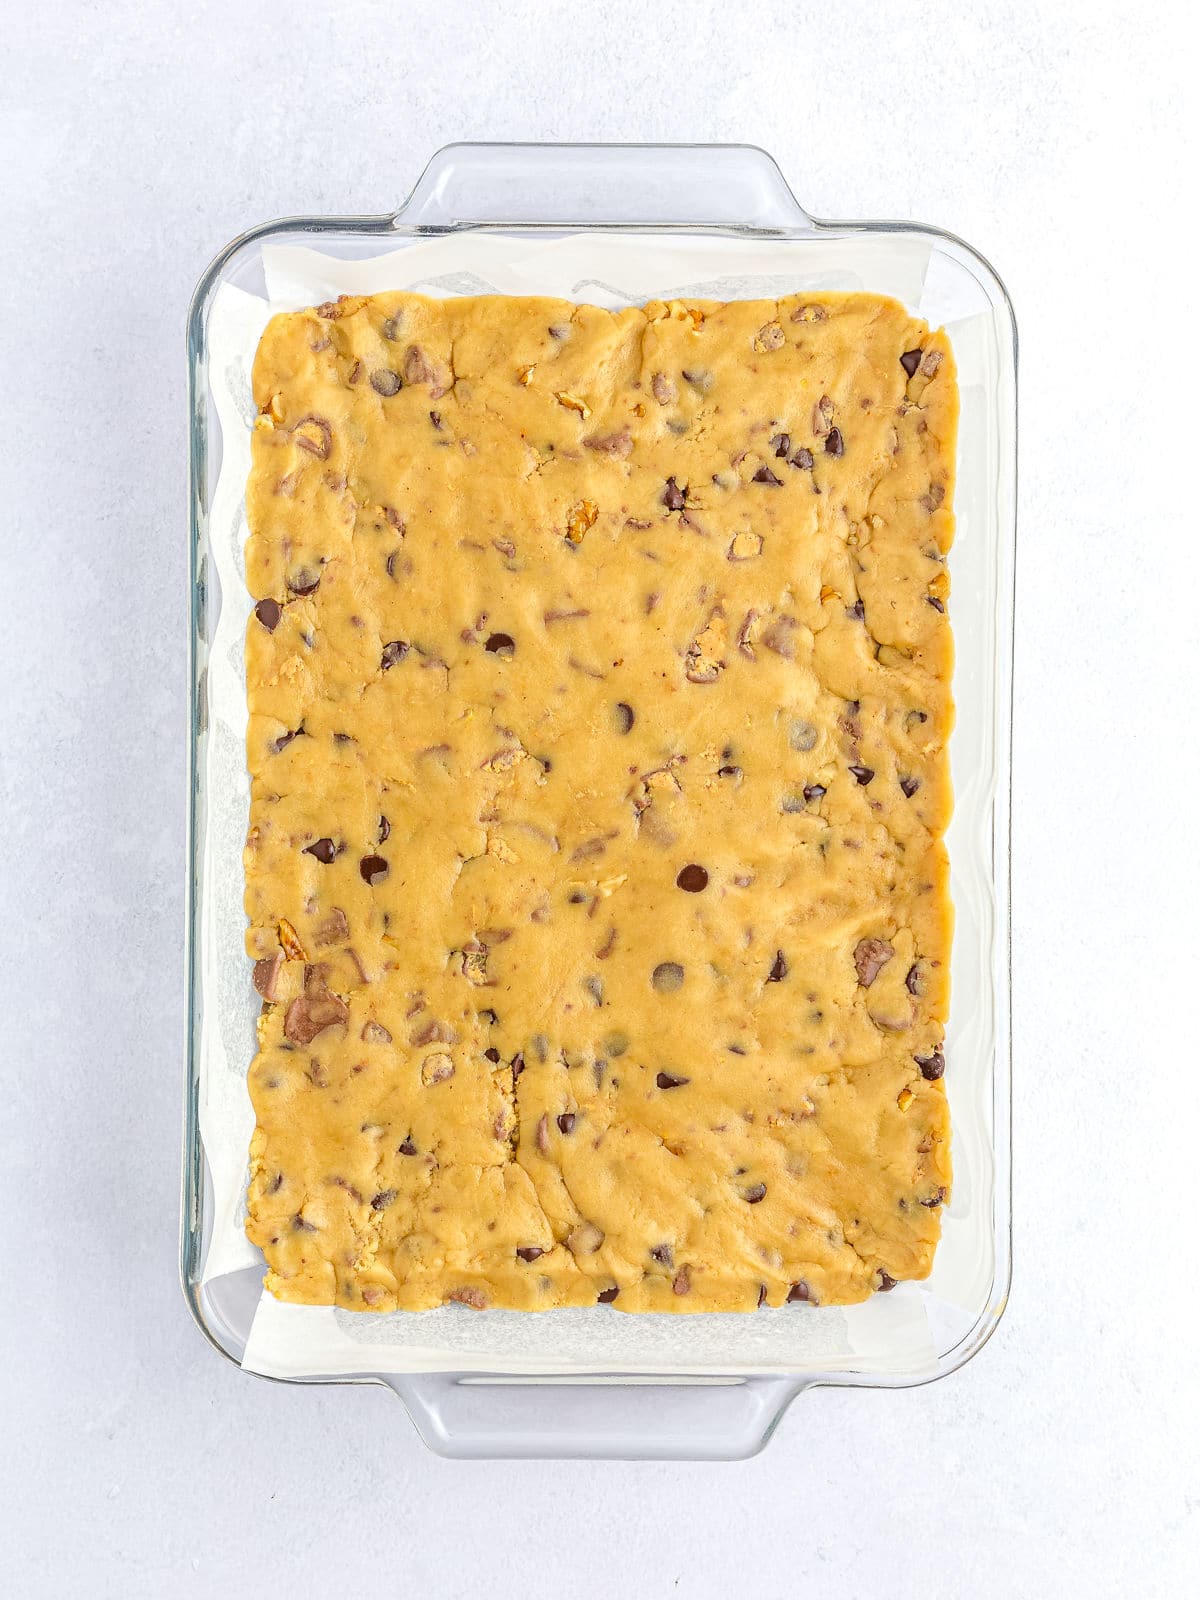 A tray of unbaked cookie dough with chocolate chips, ready to be baked.